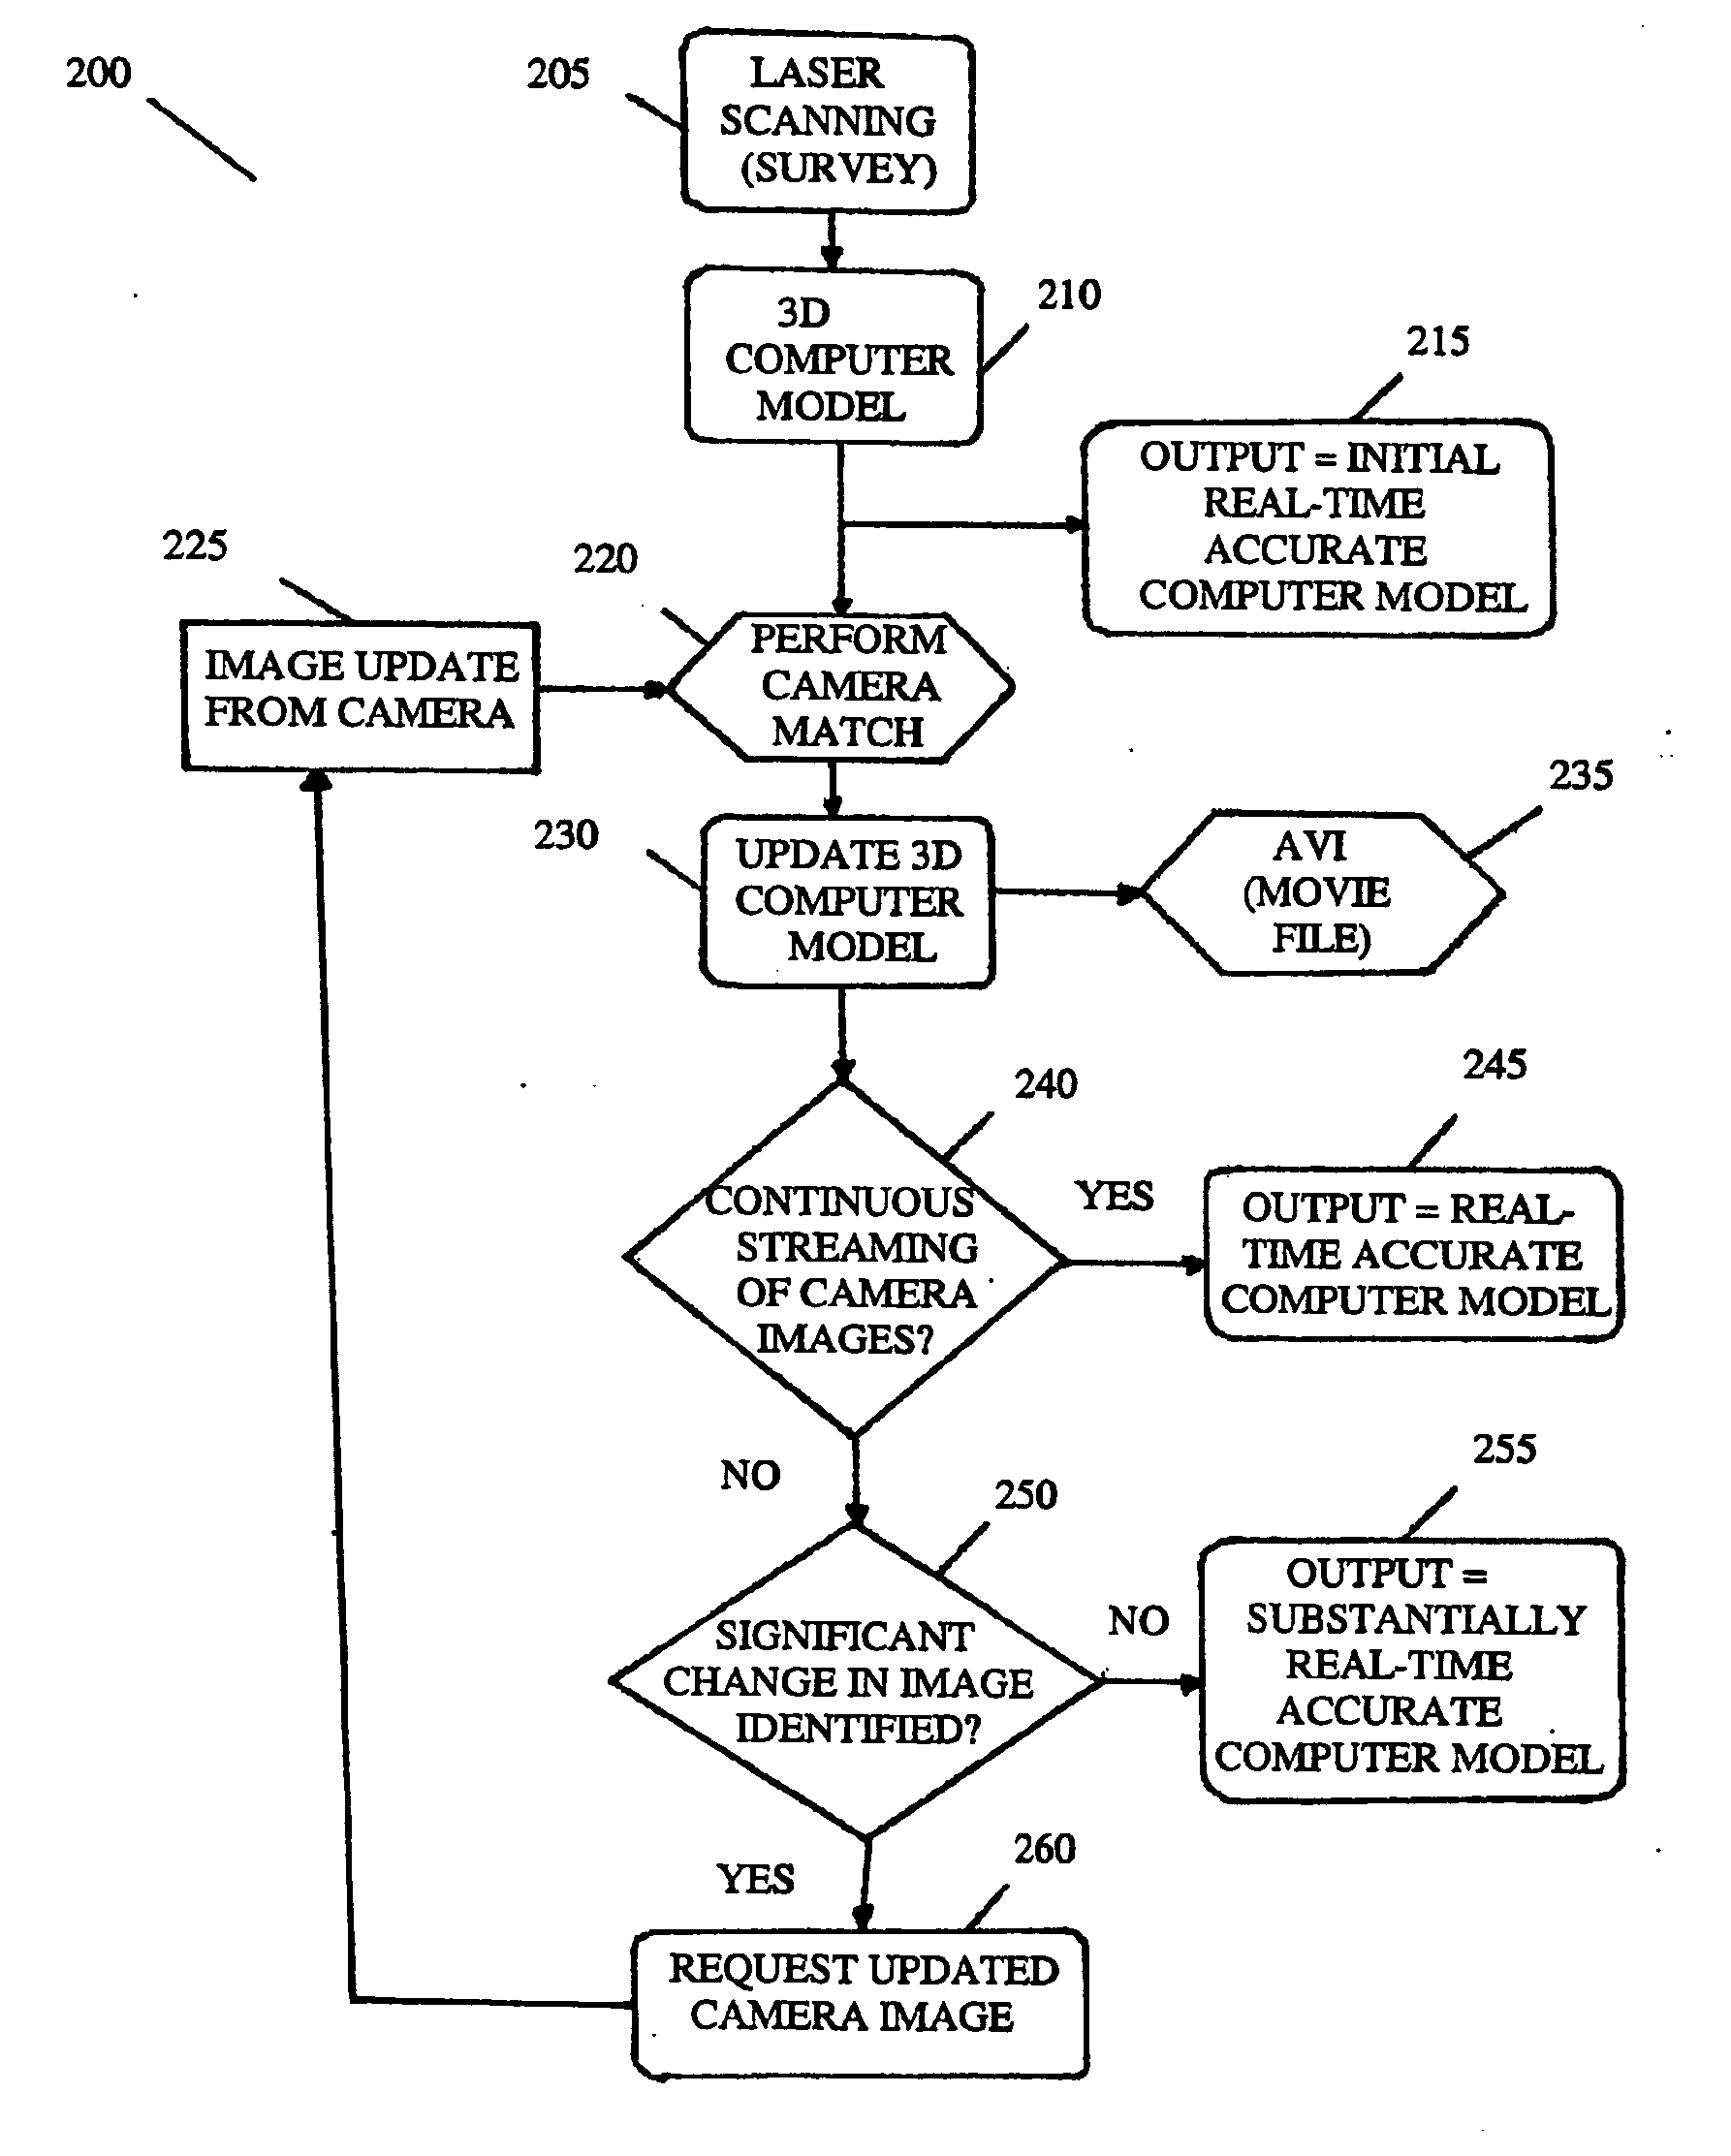 Adaptive 3D image modelling system and apparatus and method therefor